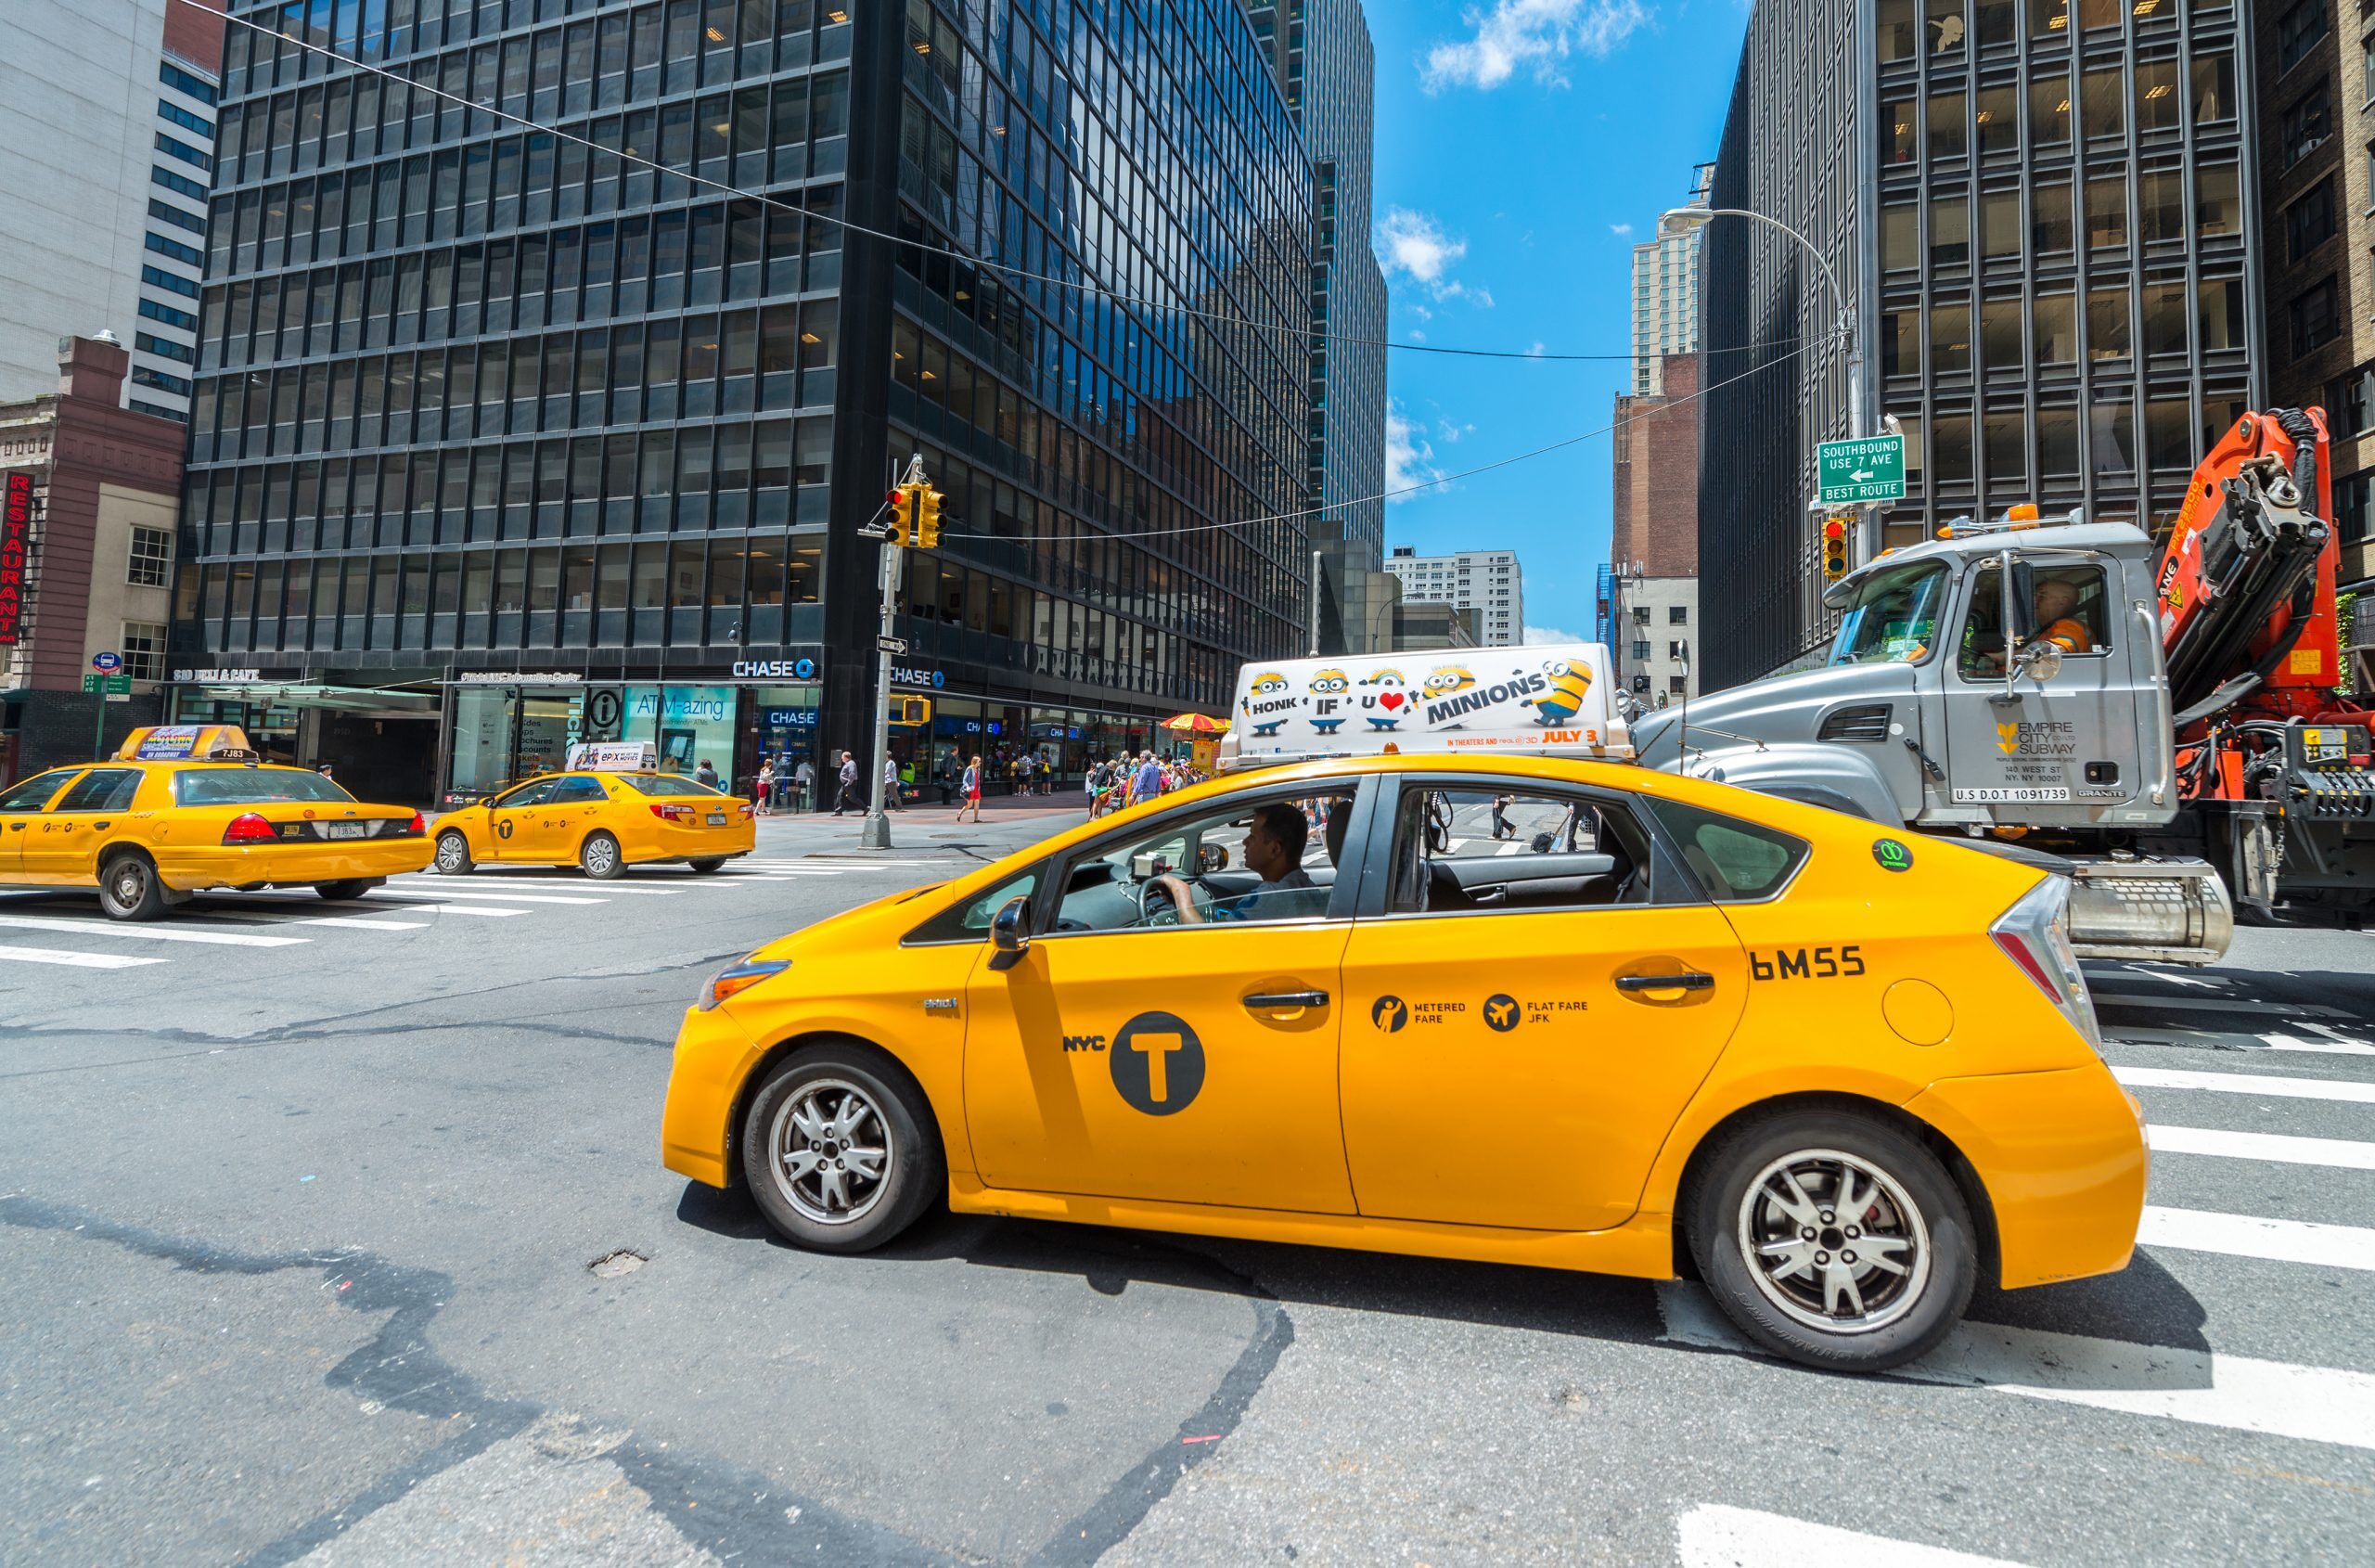 New York City cab drivers get guidance on navigating gender expression of passengers